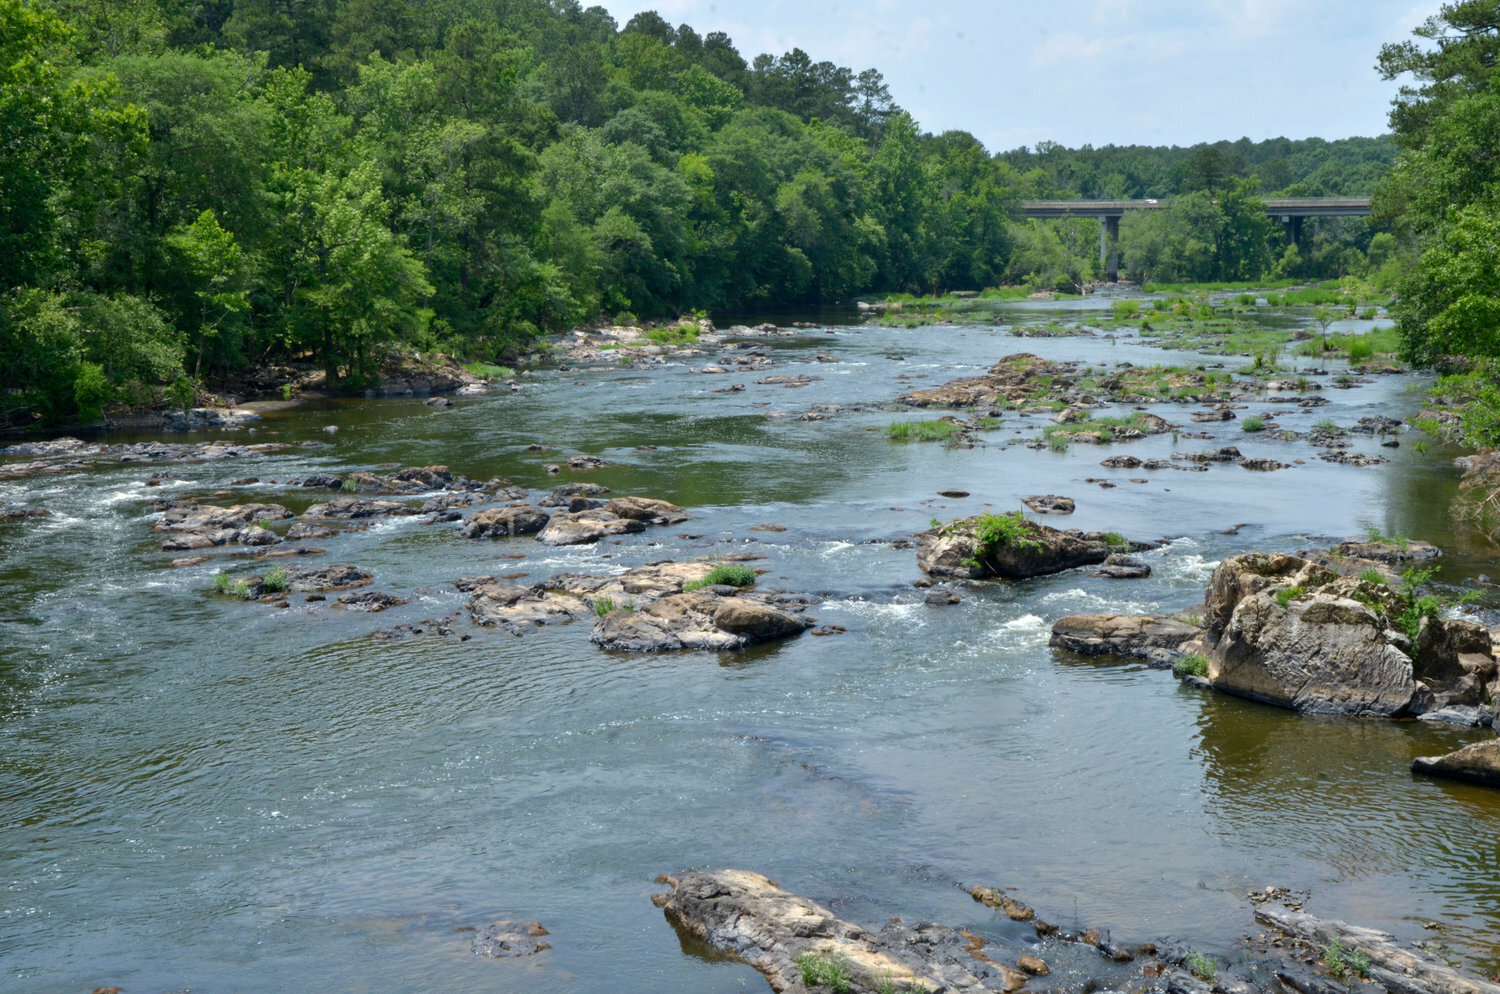 The Haw River, which flows through Pittsboro and supplies the town with its drinking water, is 'one of the most impacted' waterways in terms of unregulated chemicals in the Cape Fear Basin, according to Detlef Knappe, S. James Ellen Distinguished Professor of Civil, Construction and Environmental Engineering at N.C. State.